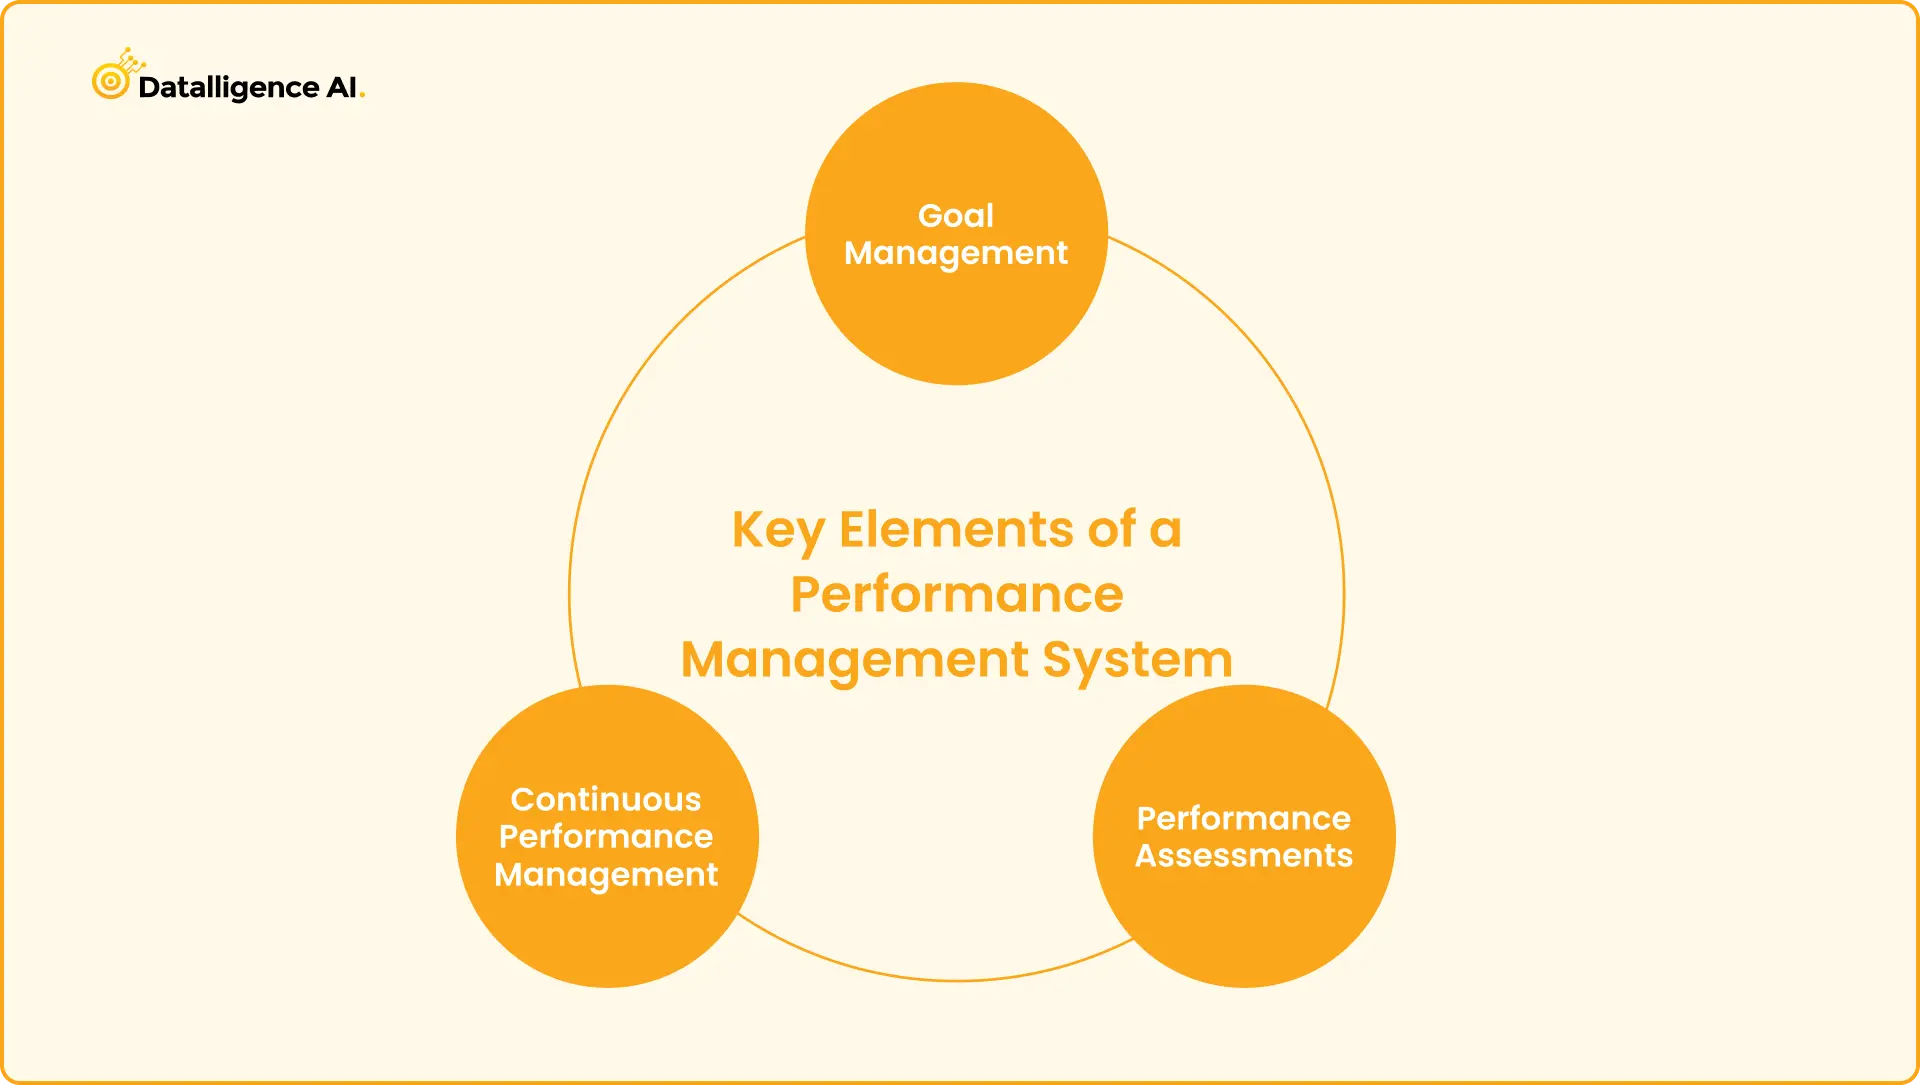 Key Elements of a Performance Management System